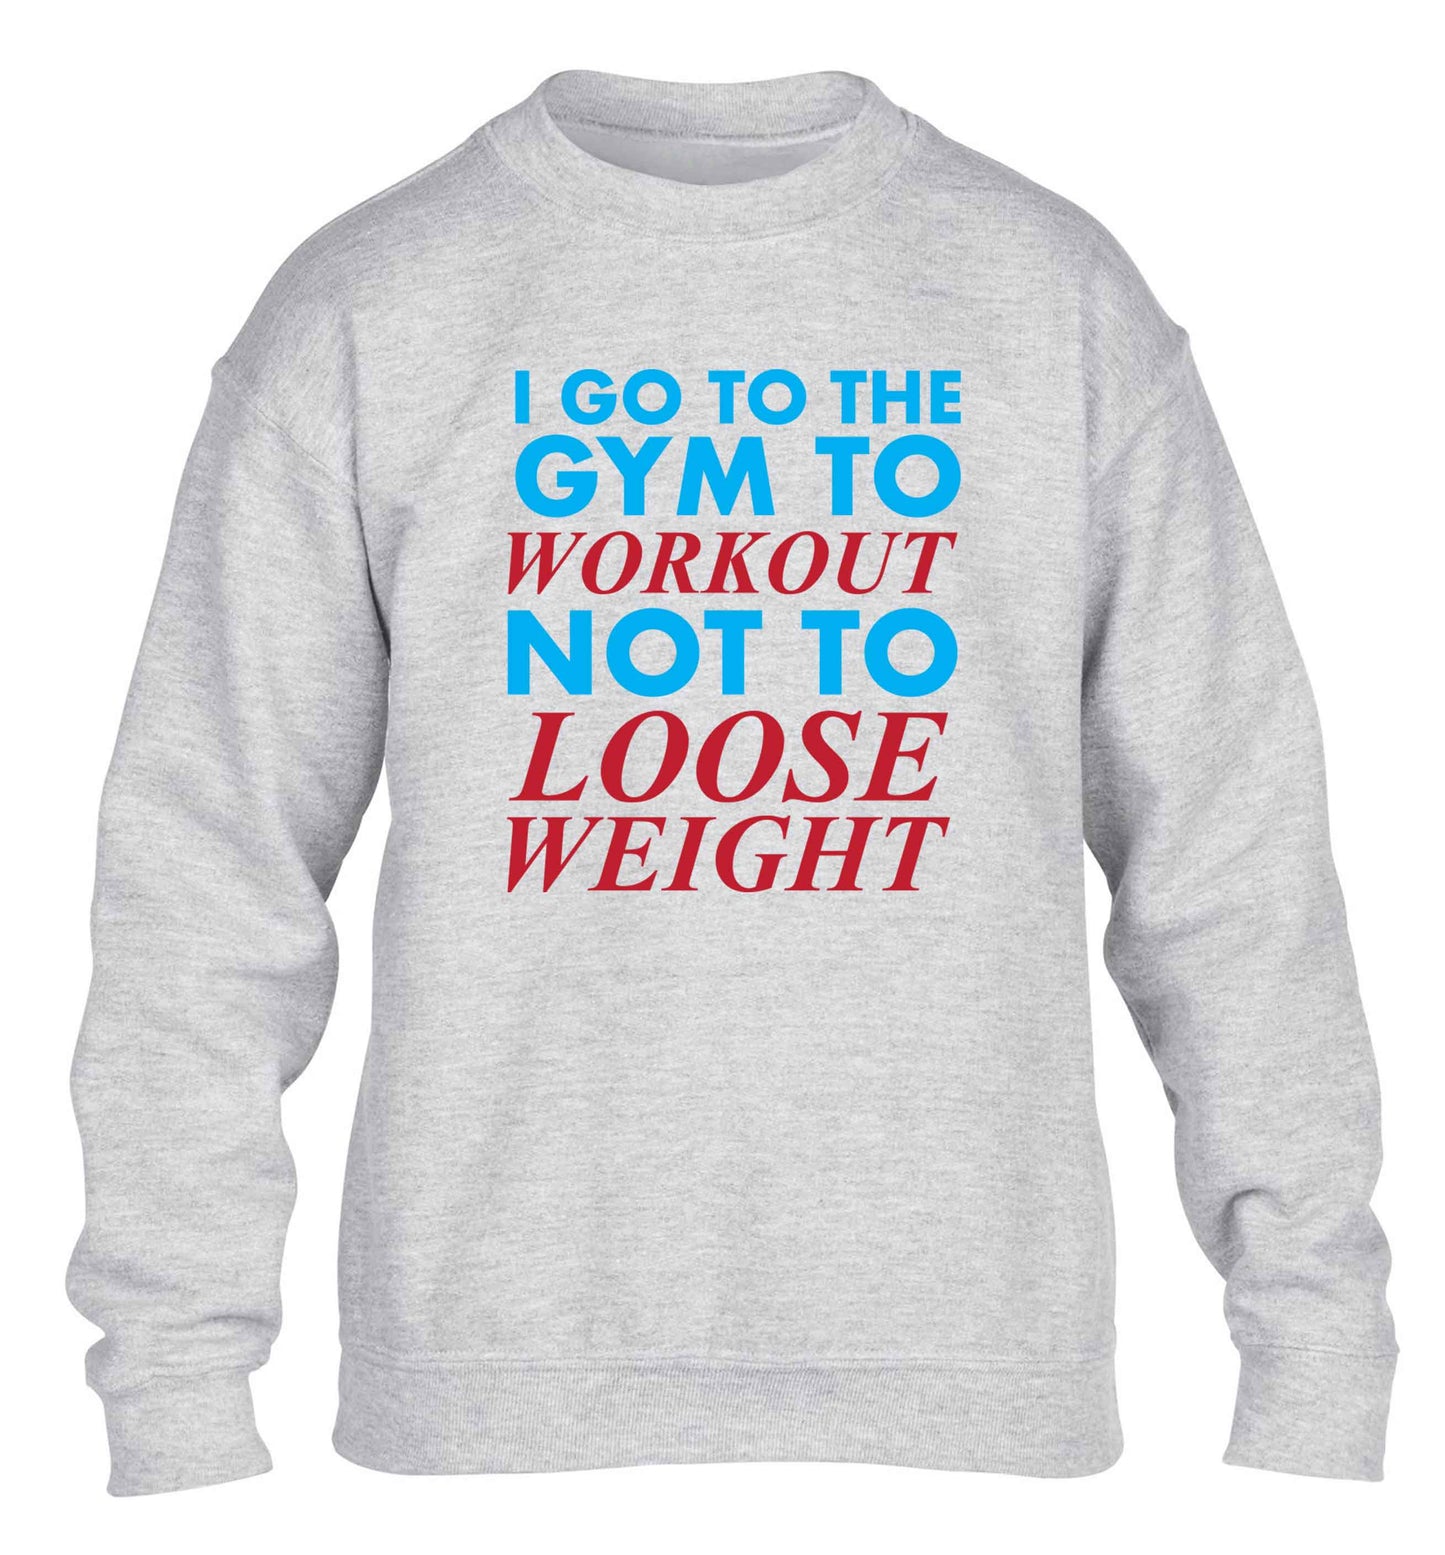 I go to the gym to workout not to loose weight children's grey sweater 12-13 Years